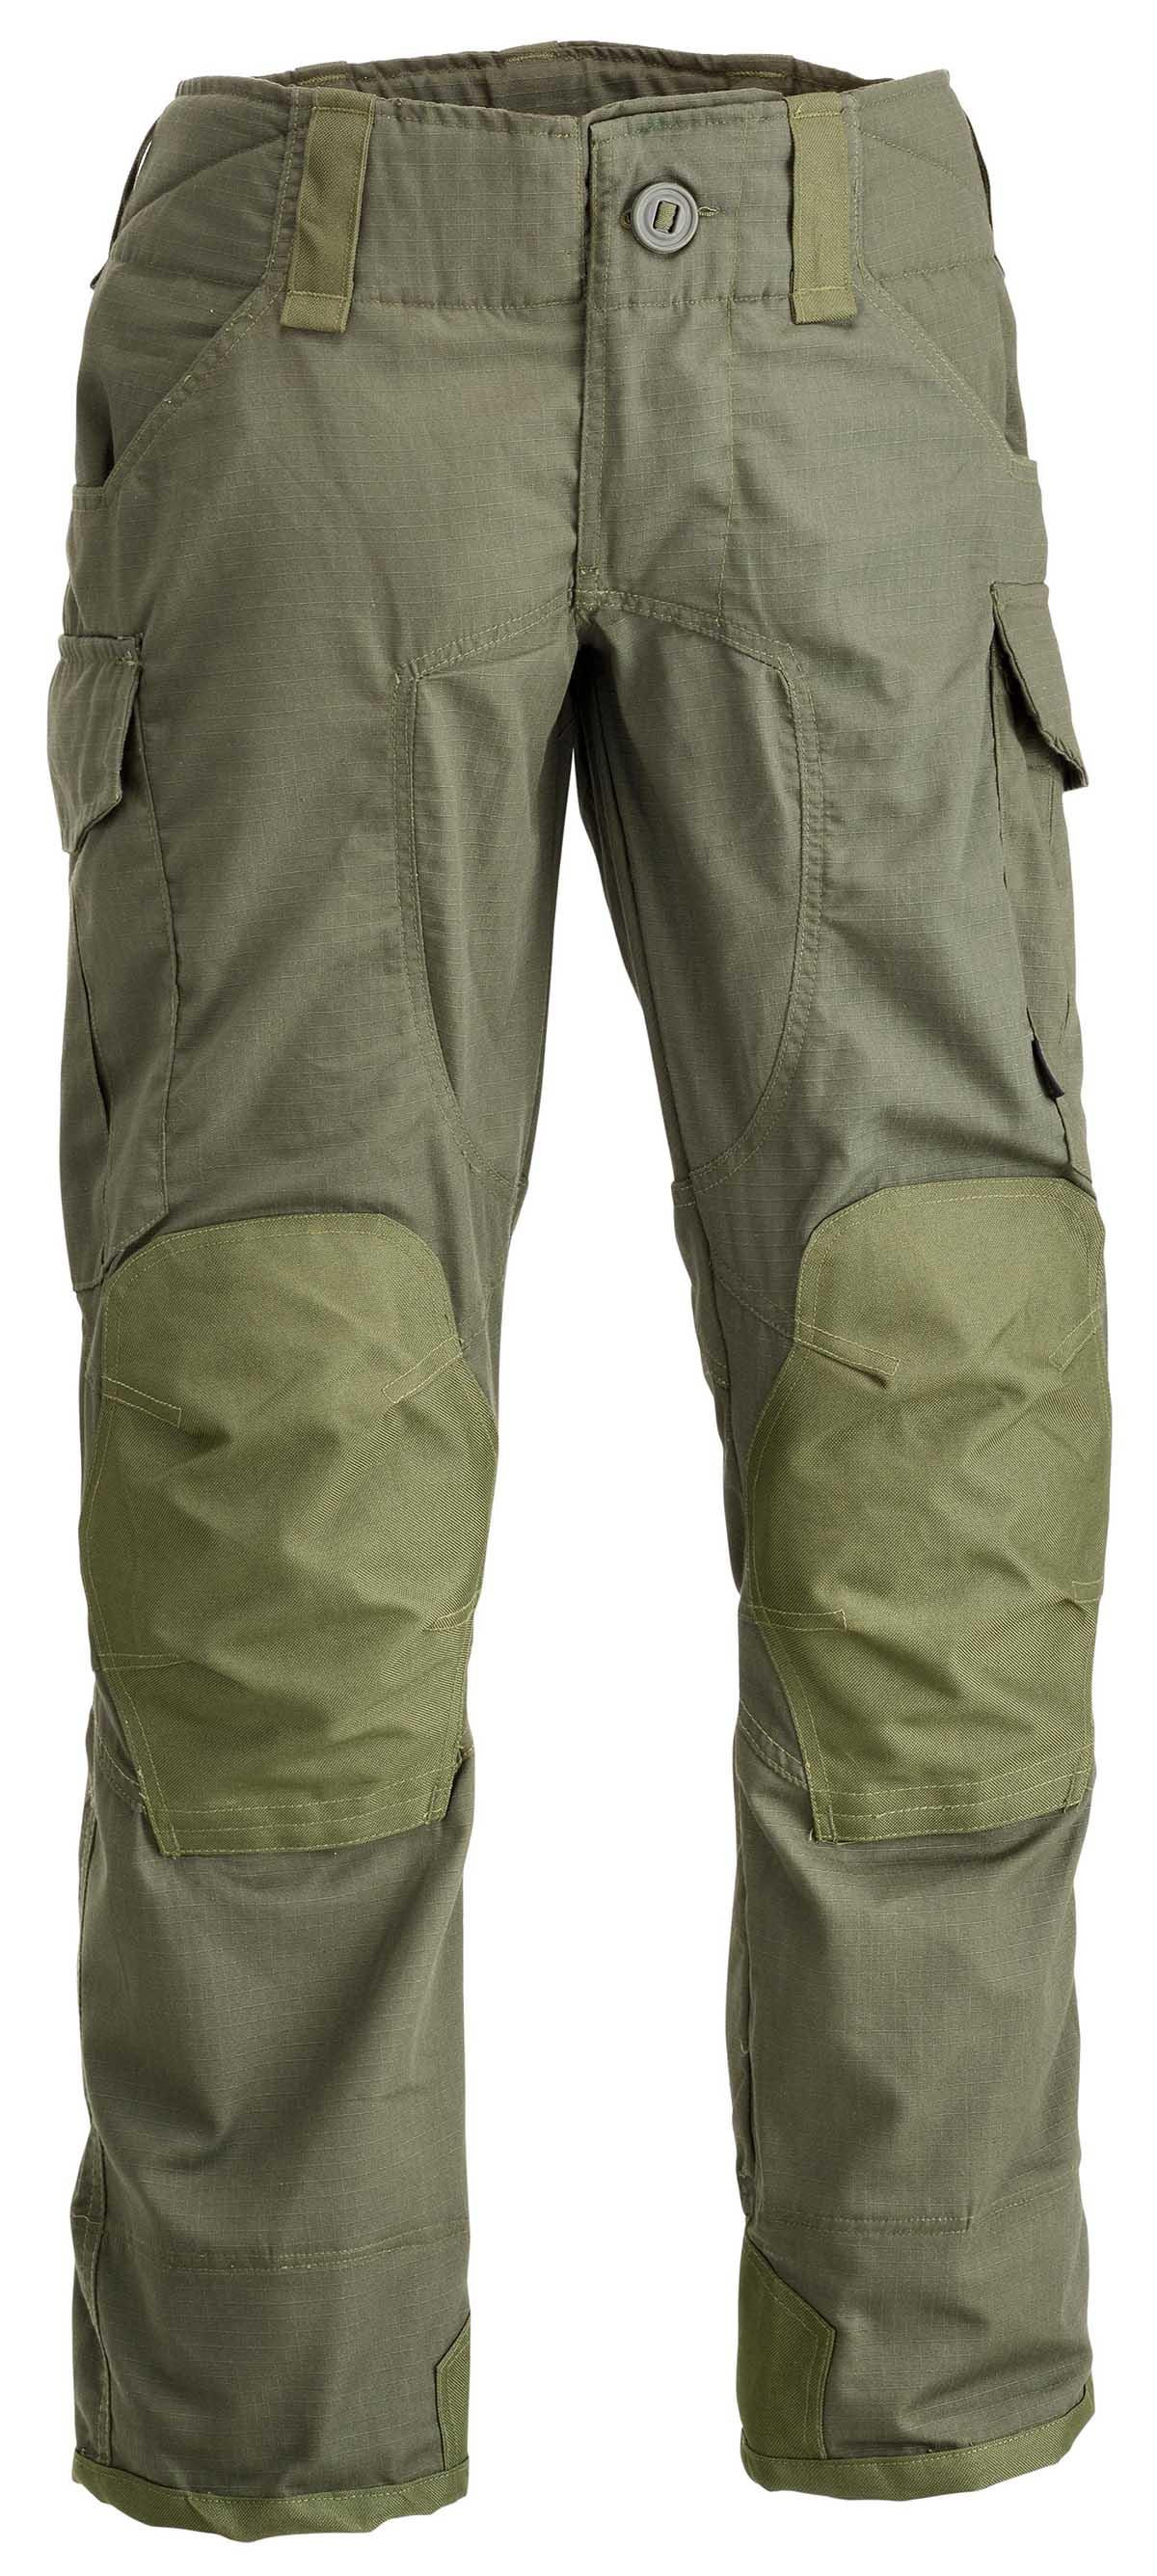 Tactical Advanced pants with soft knee pads